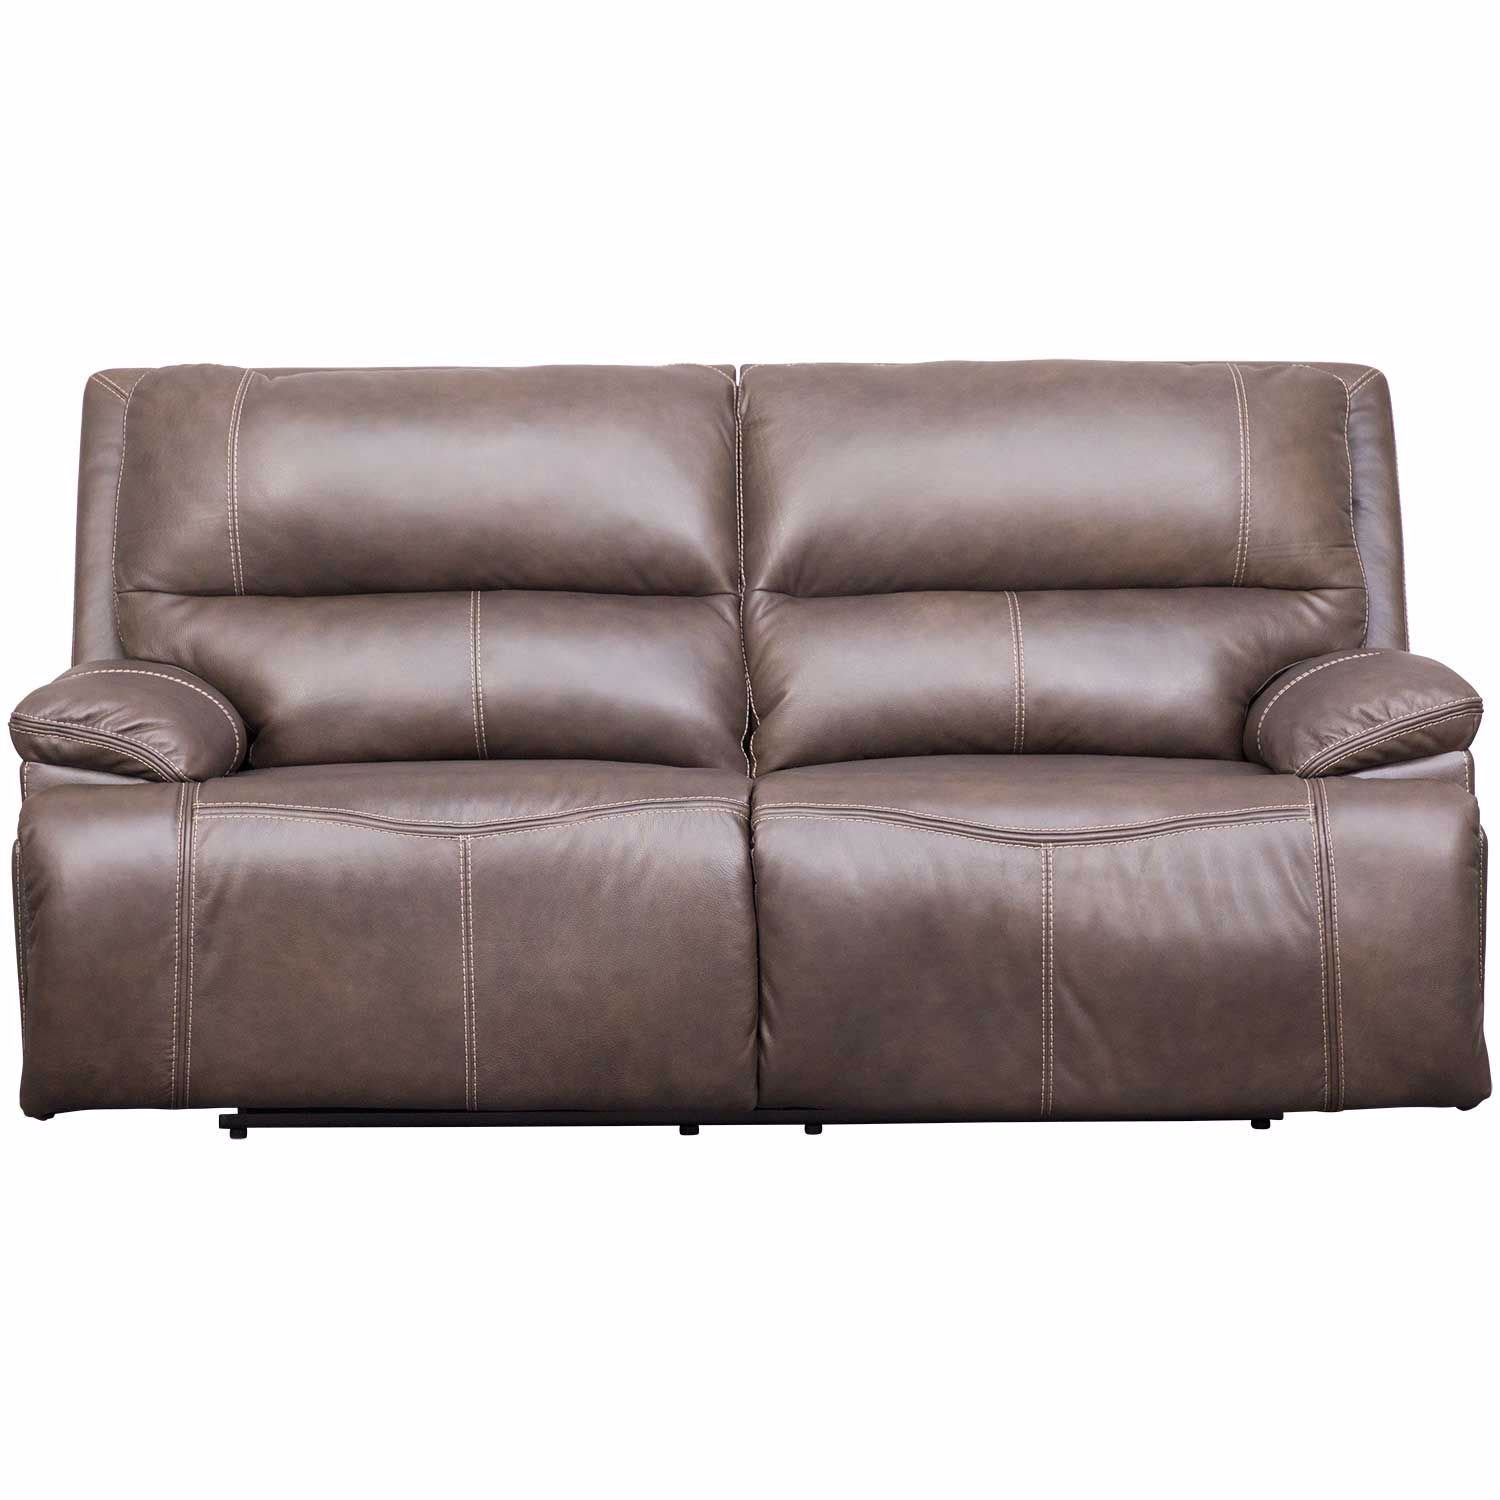 how-to-tell-if-a-sofa-is-real-leather